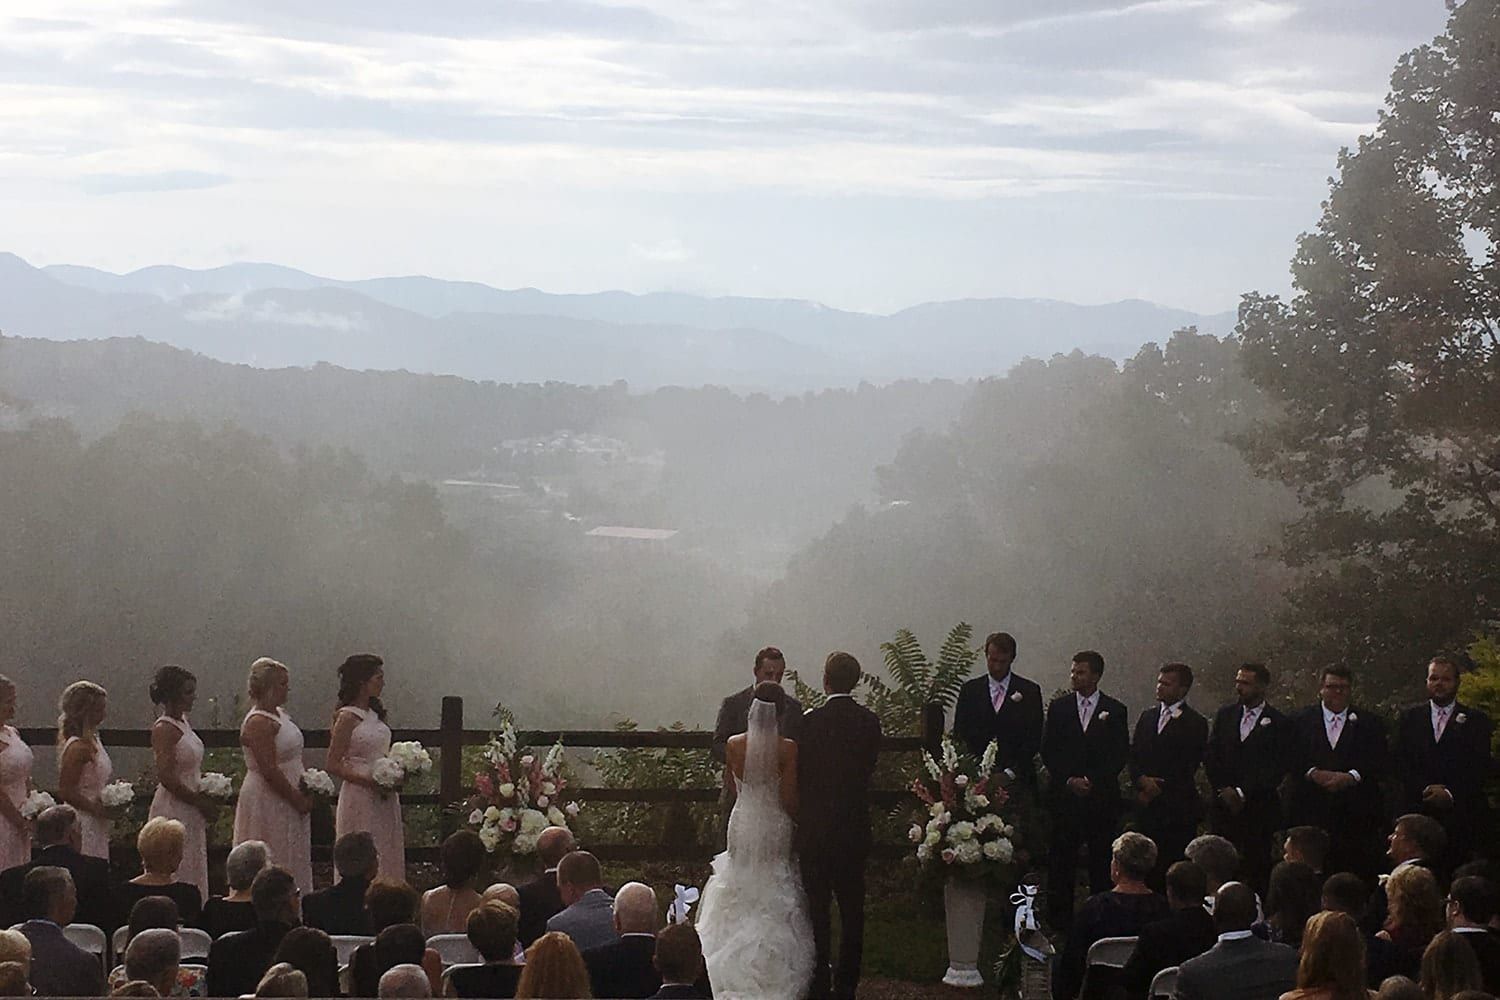 wedding dj view of an outdoor wedding ceremony in asheville, nc